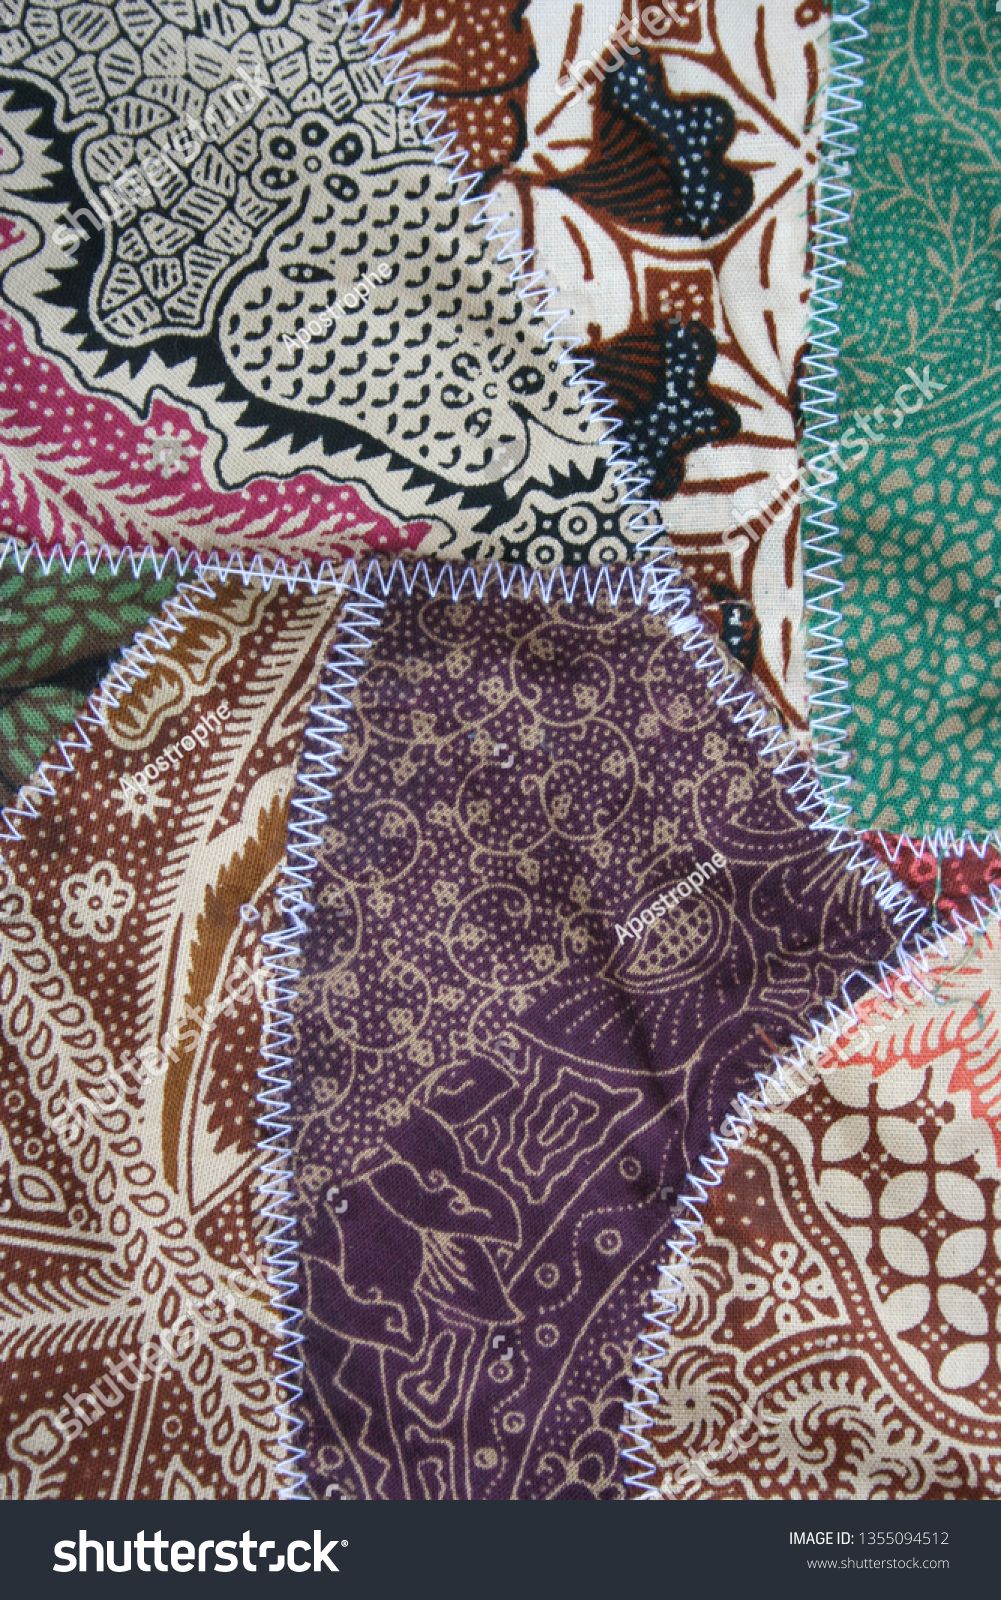 Batik material background, Indonesian material pieced together with white zigzag stiches in crazy quilt design in colorful blue green pink and brown colors #1355094512